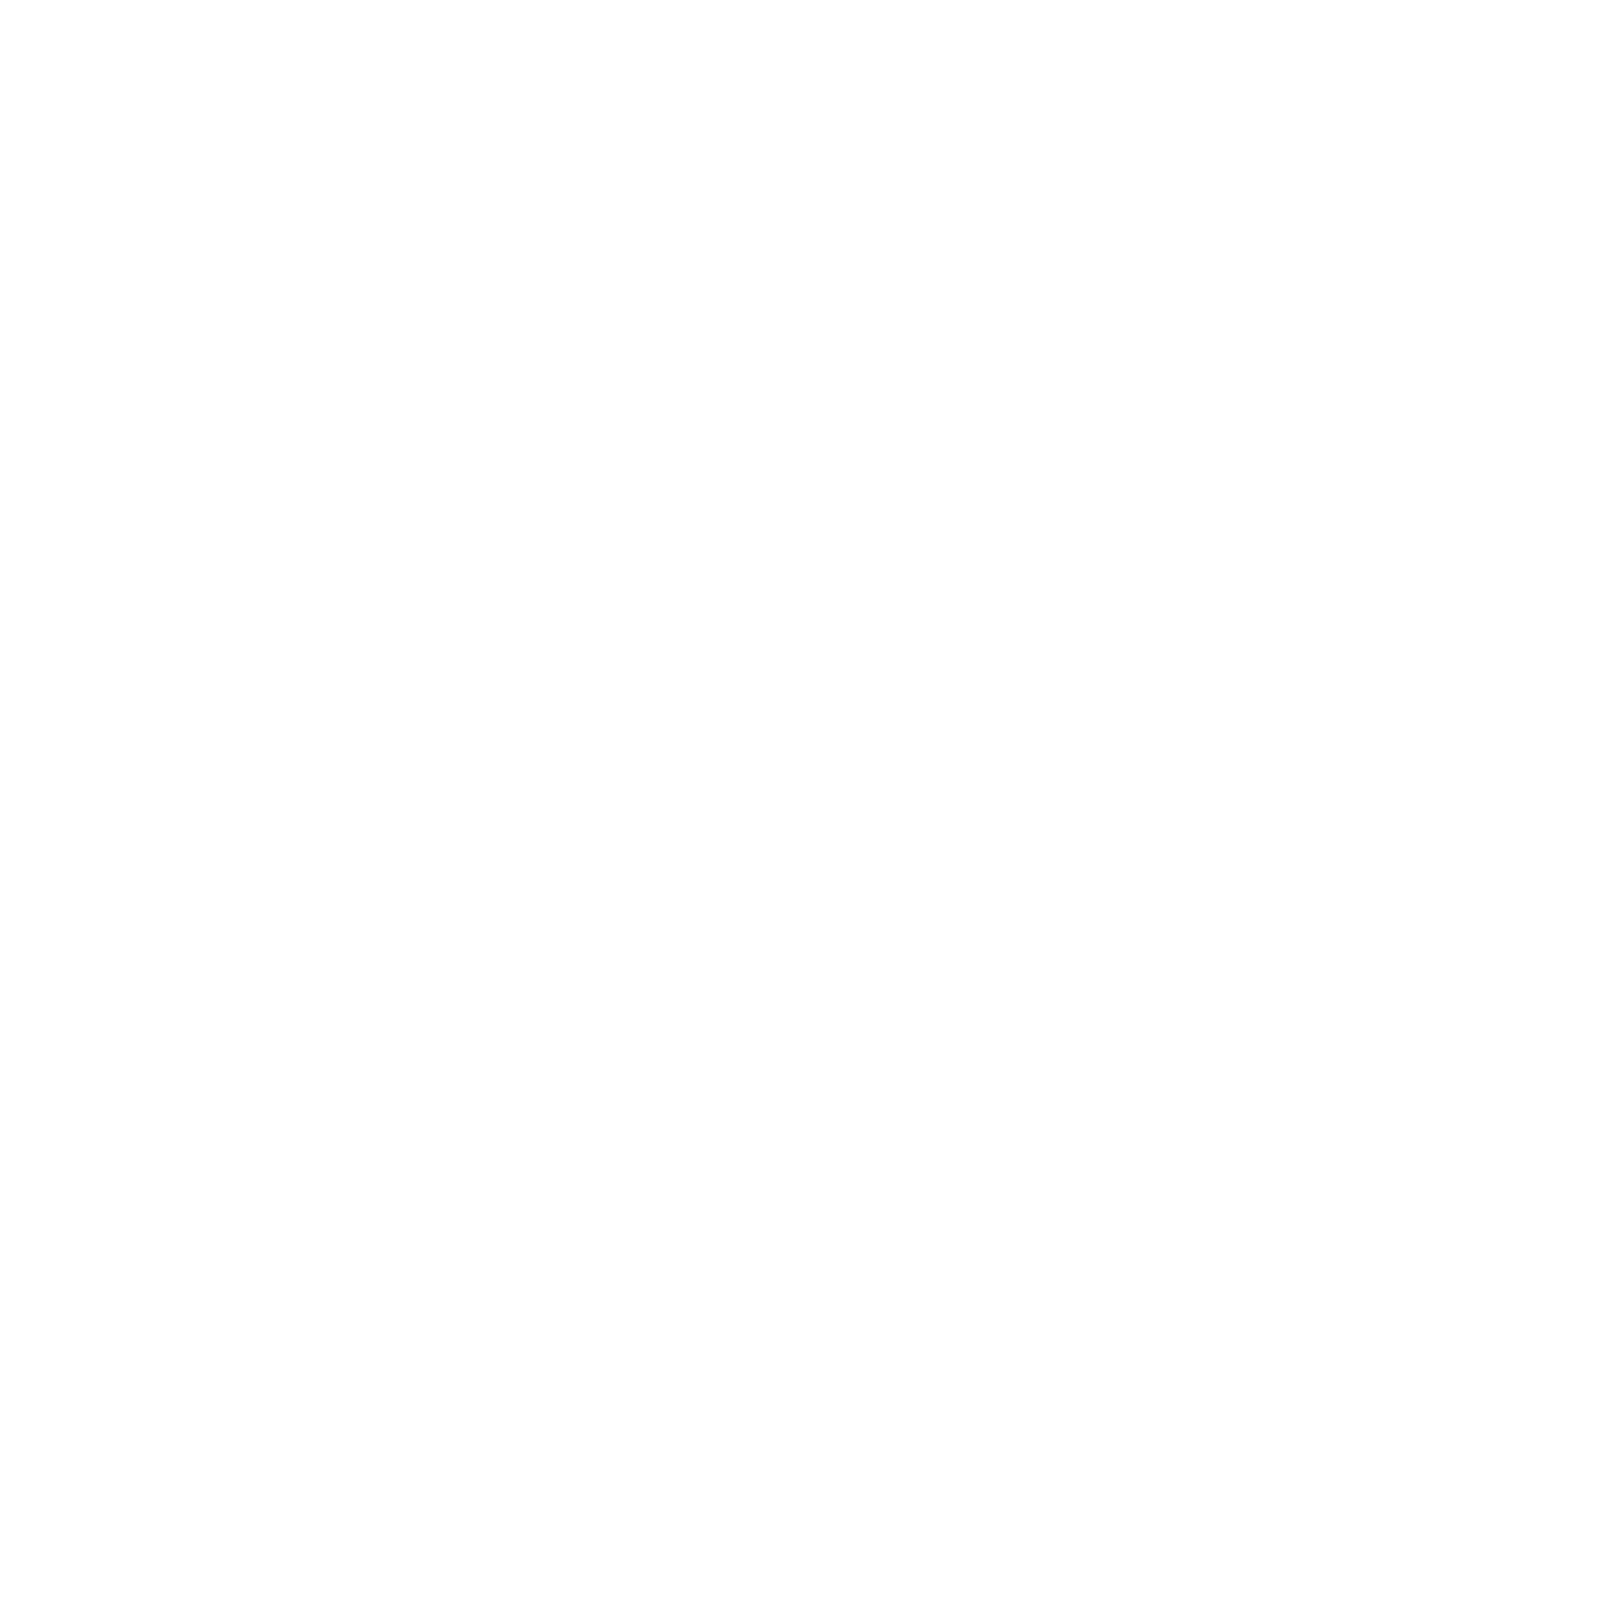 Beppy Tampons Logo